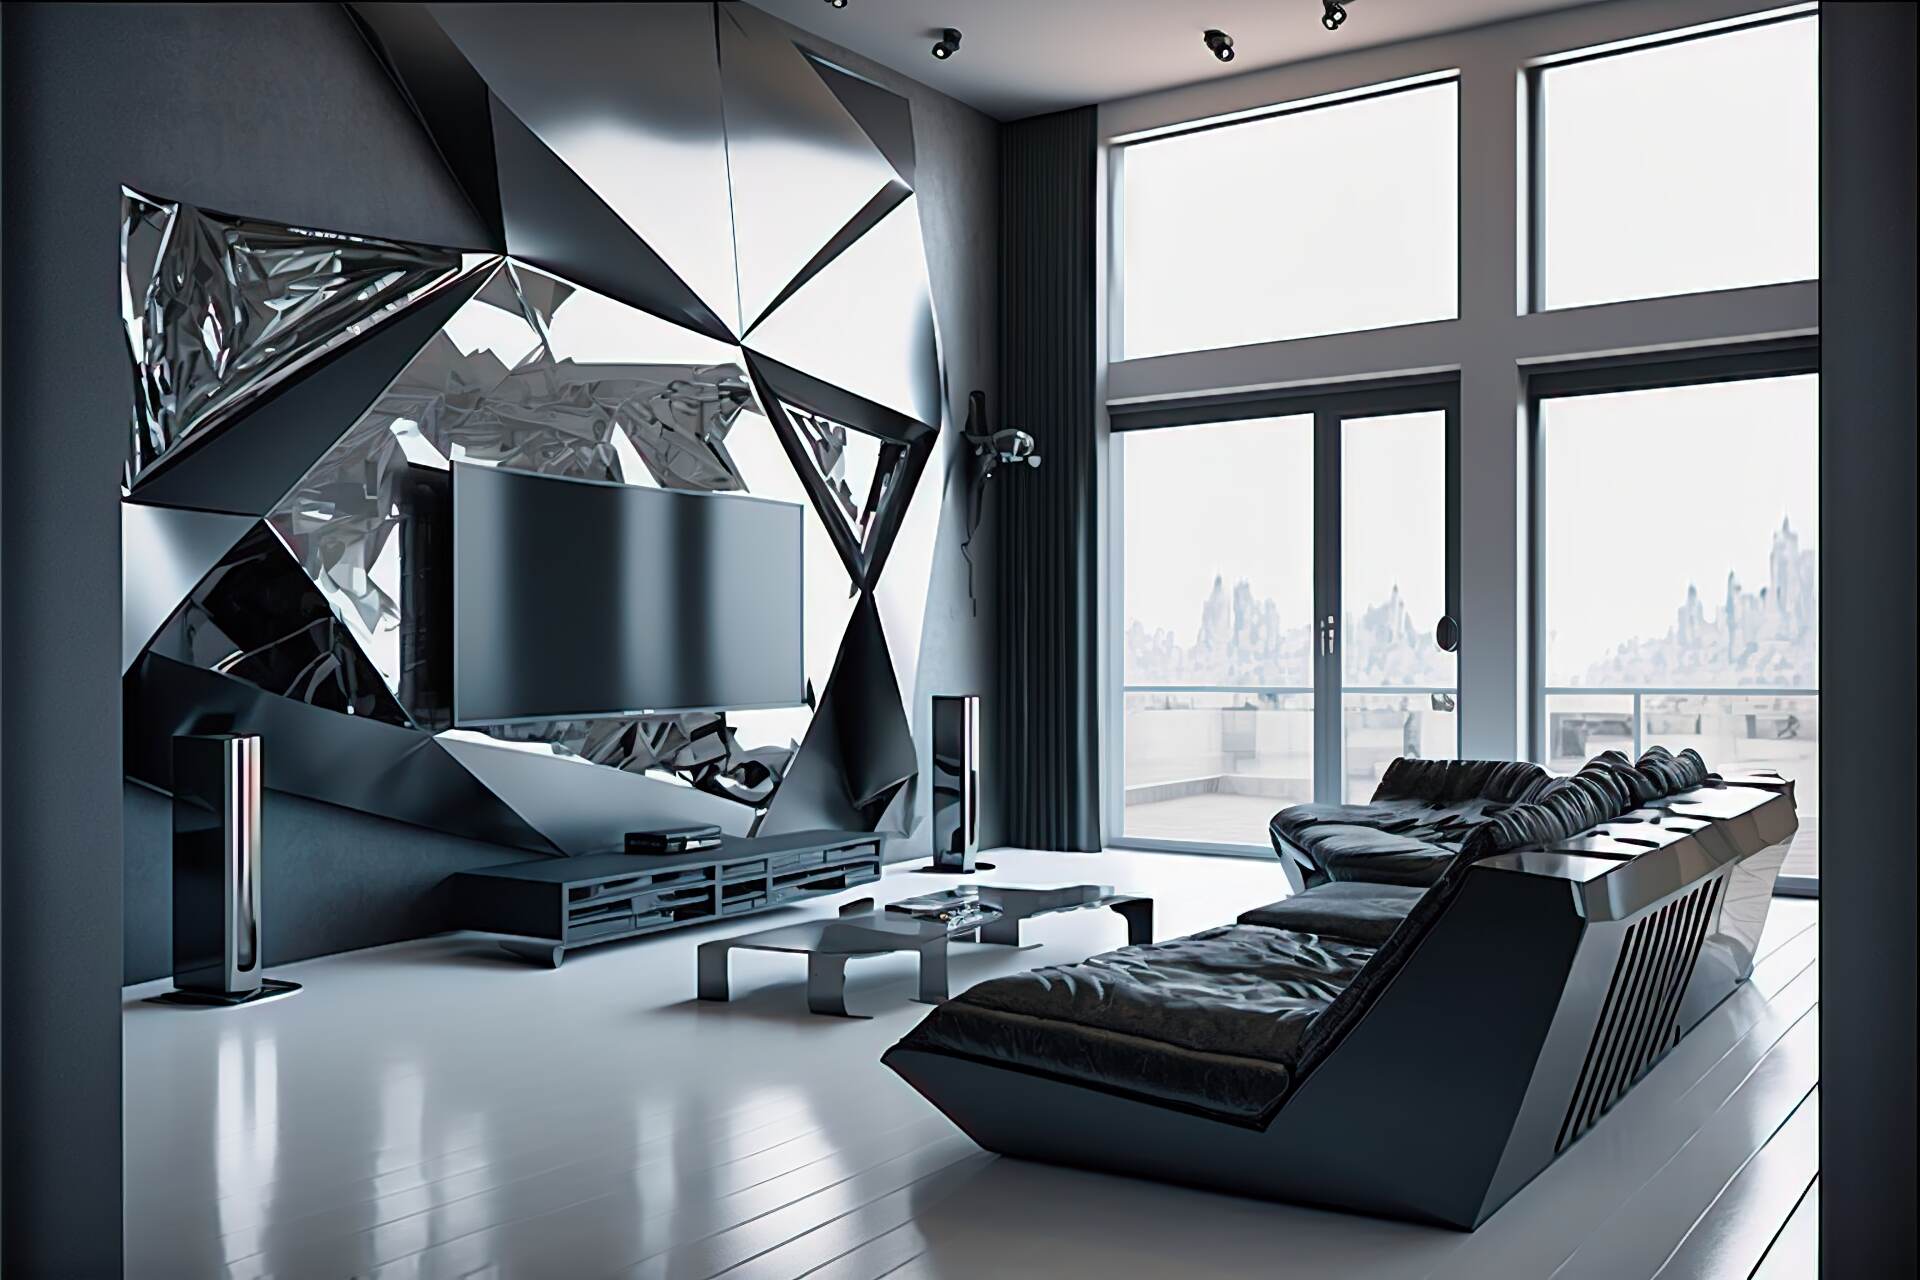 A Cyberpunk-Style Living Room With A Futuristic And High-Tech Feel. The Walls Are Made Of Sleek, Reflective Metal, And The Furniture Is Made Up Of Angular And Geometric Pieces In A Monochromatic Color Scheme Of Black And Silver. A Large Flat Screen Tv Is Mounted On The Wall, And A Holographic Display Is Mounted Above The Couch, Creating An Immersive Viewing Experience. A High-Tech Sound System And A Virtual Reality Gaming System Complete The Look.